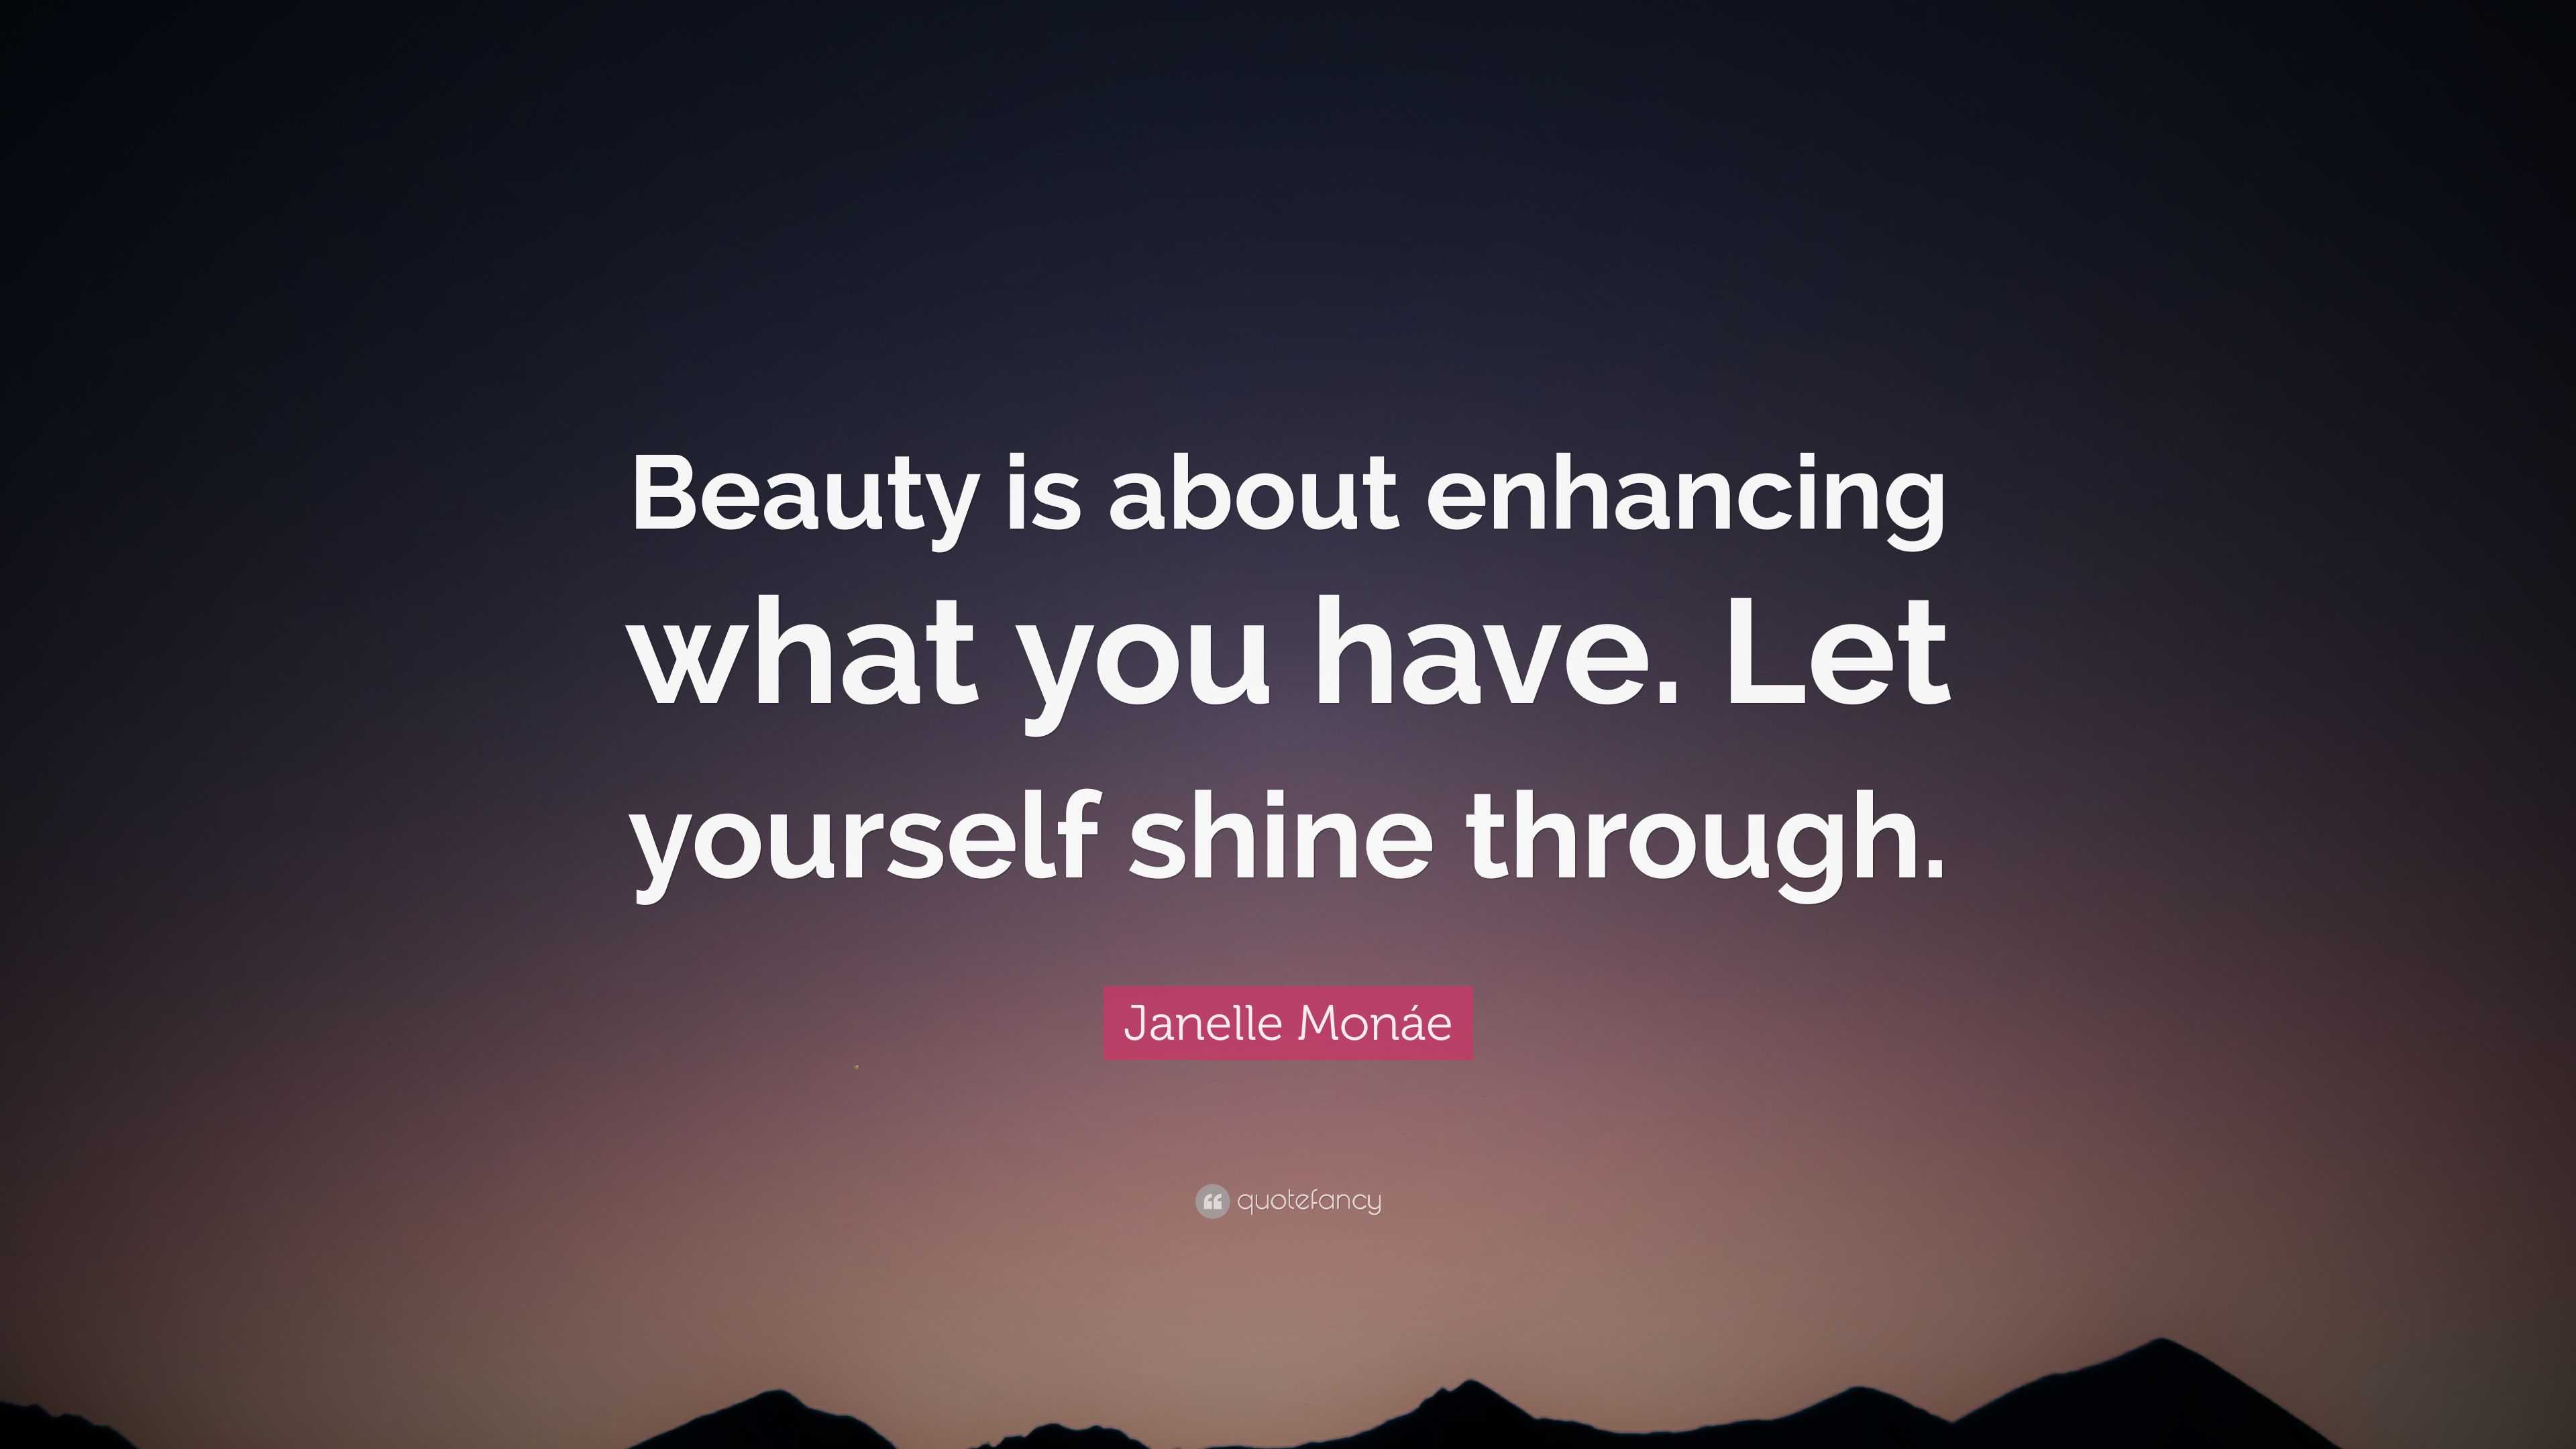 Janelle Monáe Quote: “Beauty is about enhancing what you have. Let